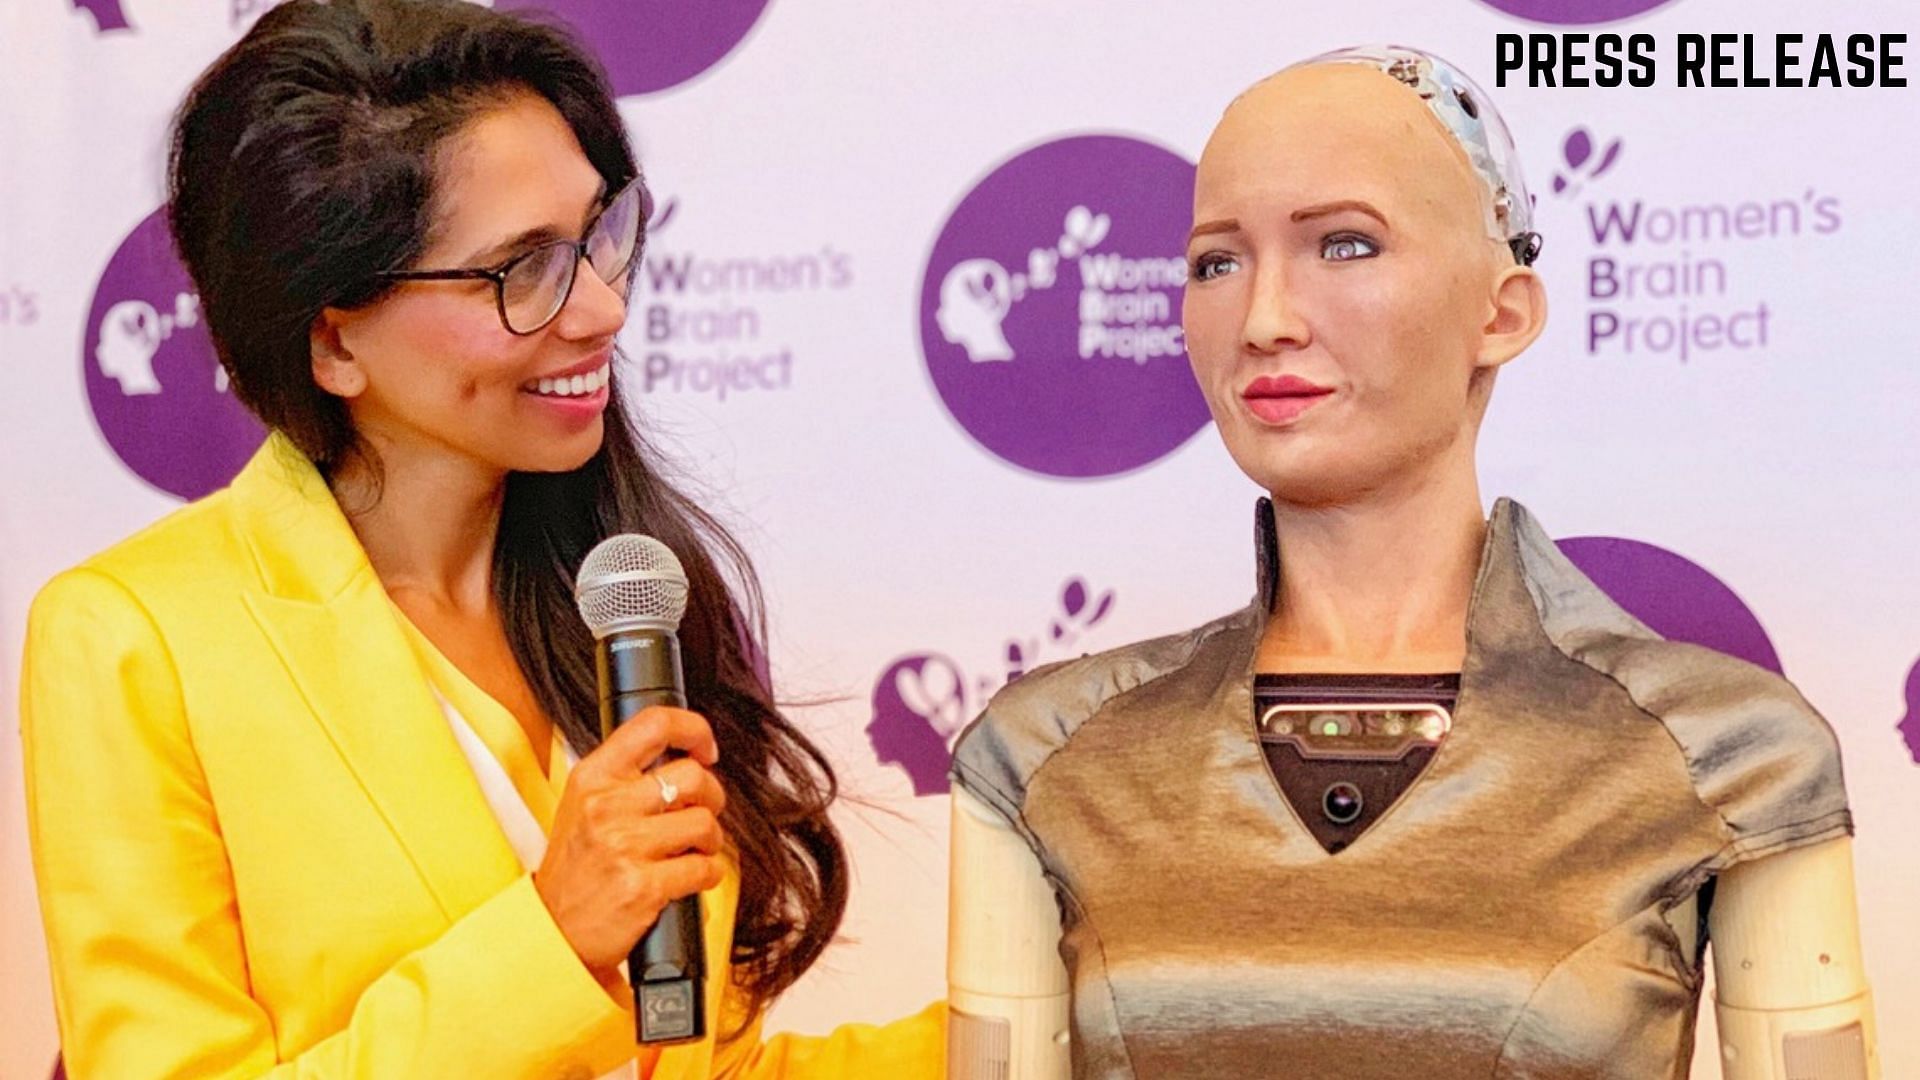 Fagun interviewing Sophia, the most advanced humanoid robot in the world